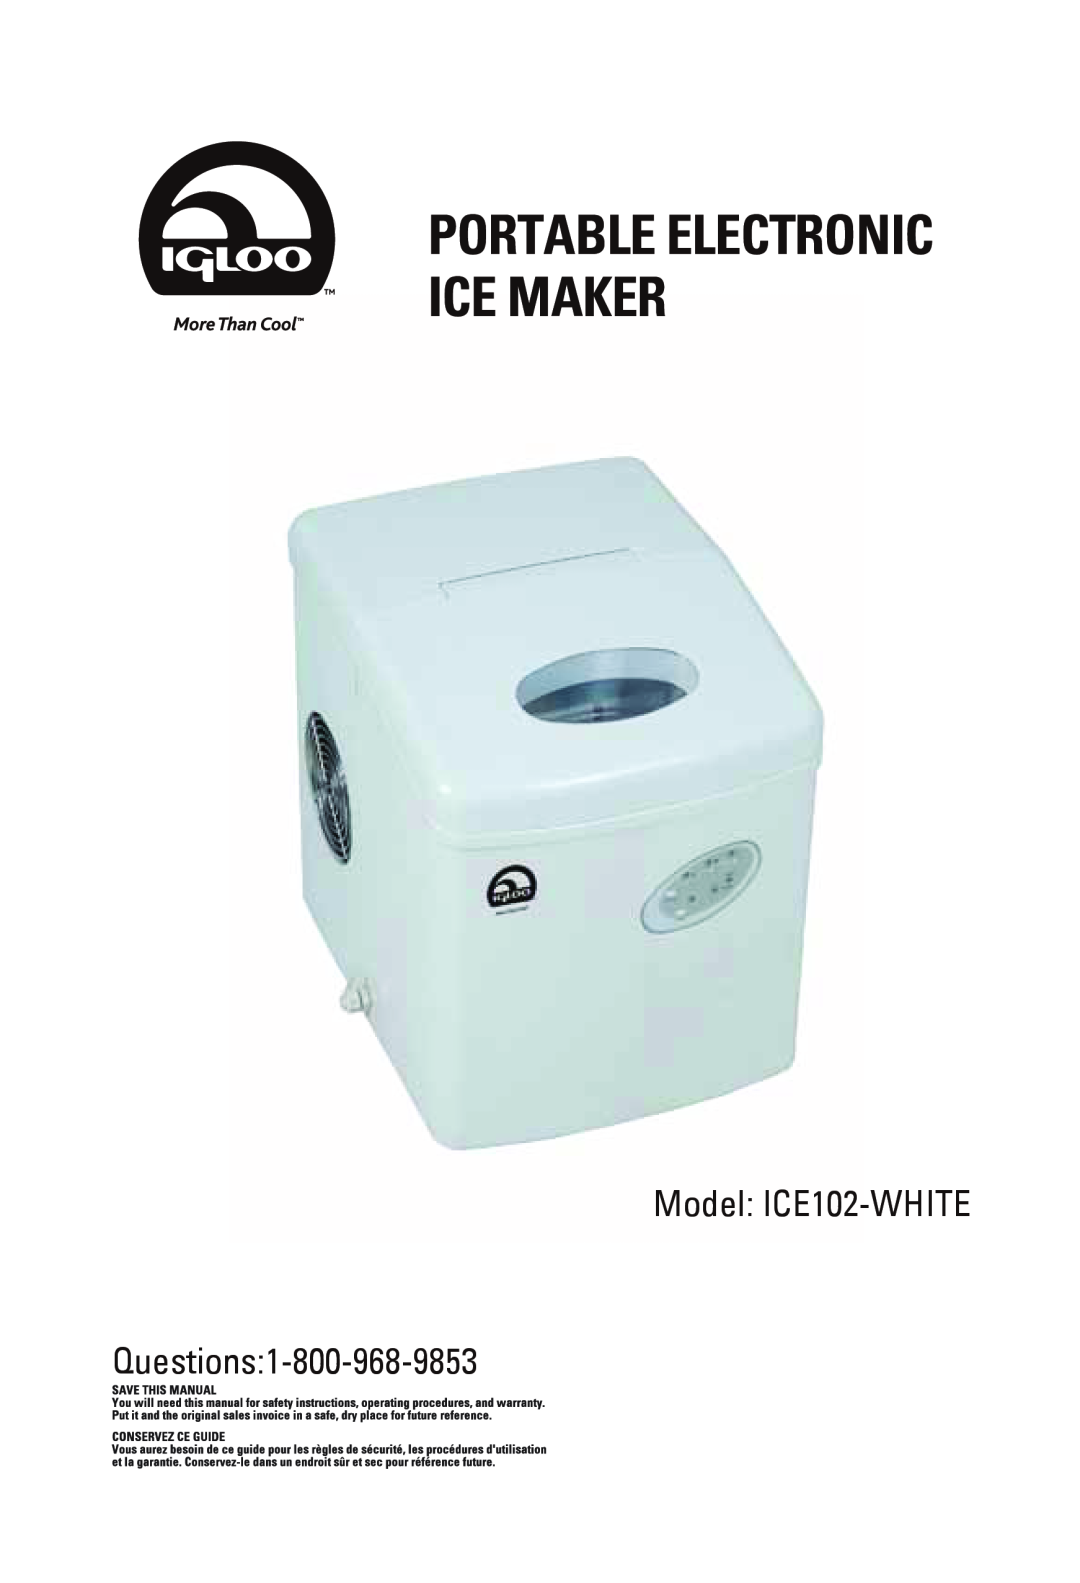 Igloo manual Model ICE102-WHITE, Questions1-800-968-9853 